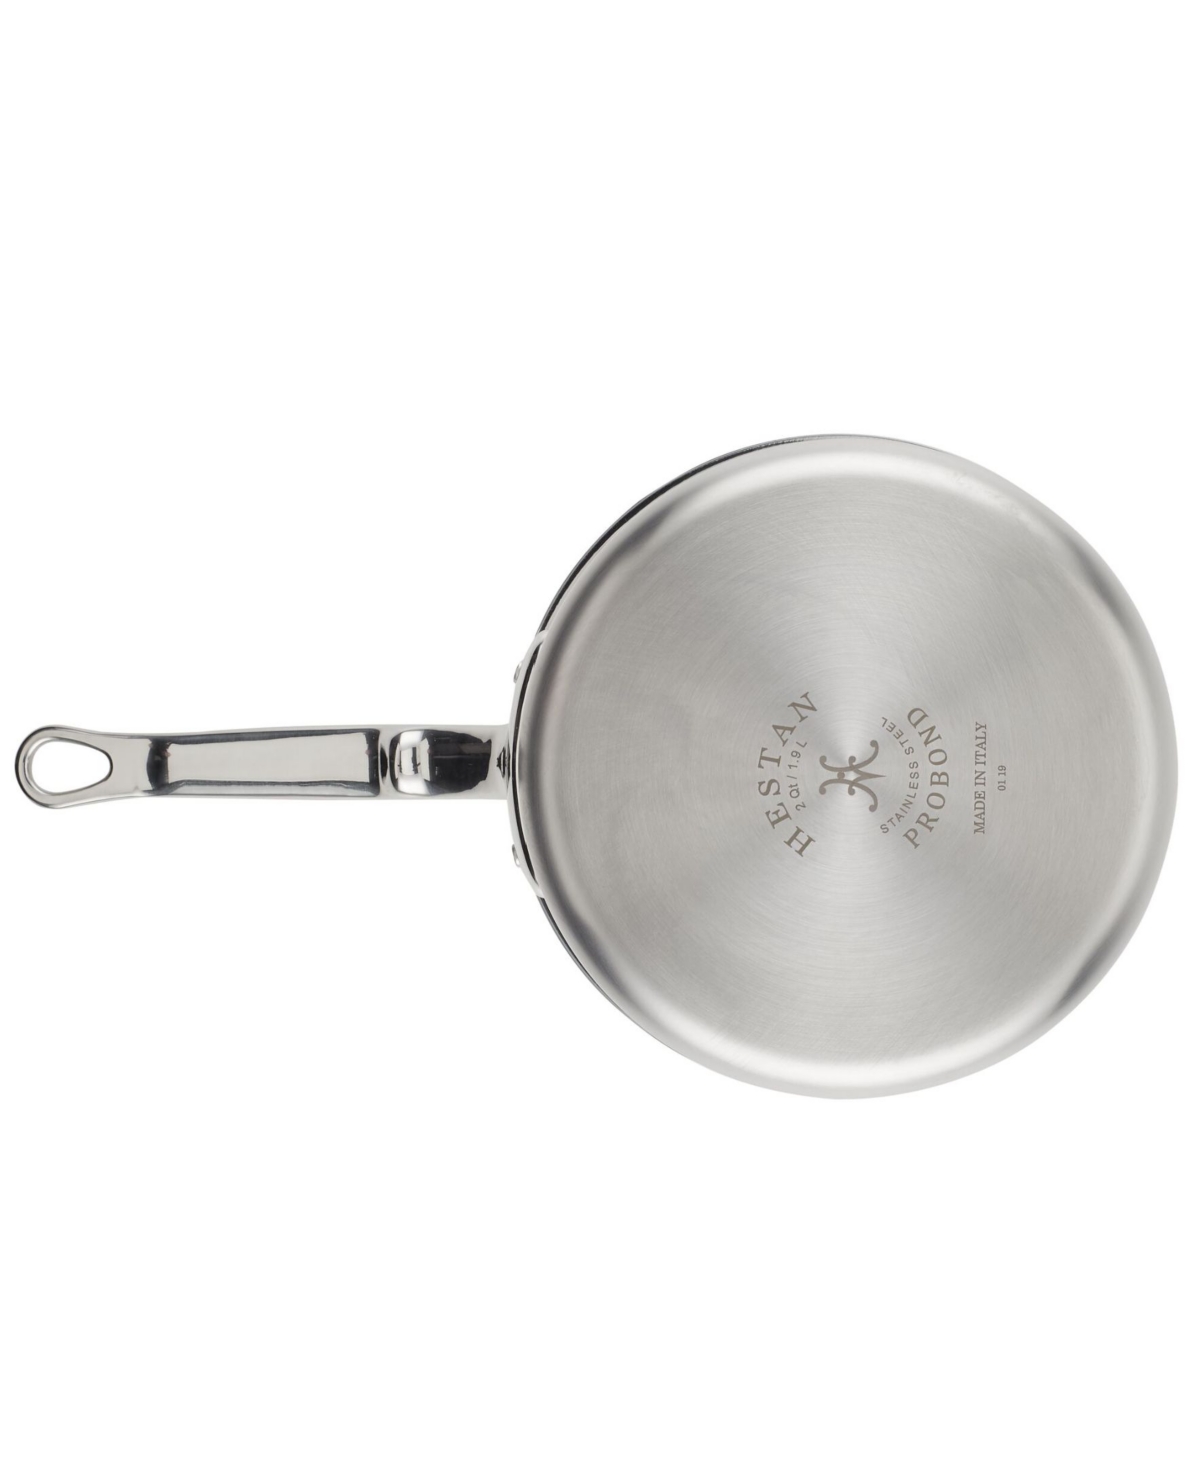 Shop Hestan Probond Clad Stainless Steel 2-quart Covered Saucepan In Silver